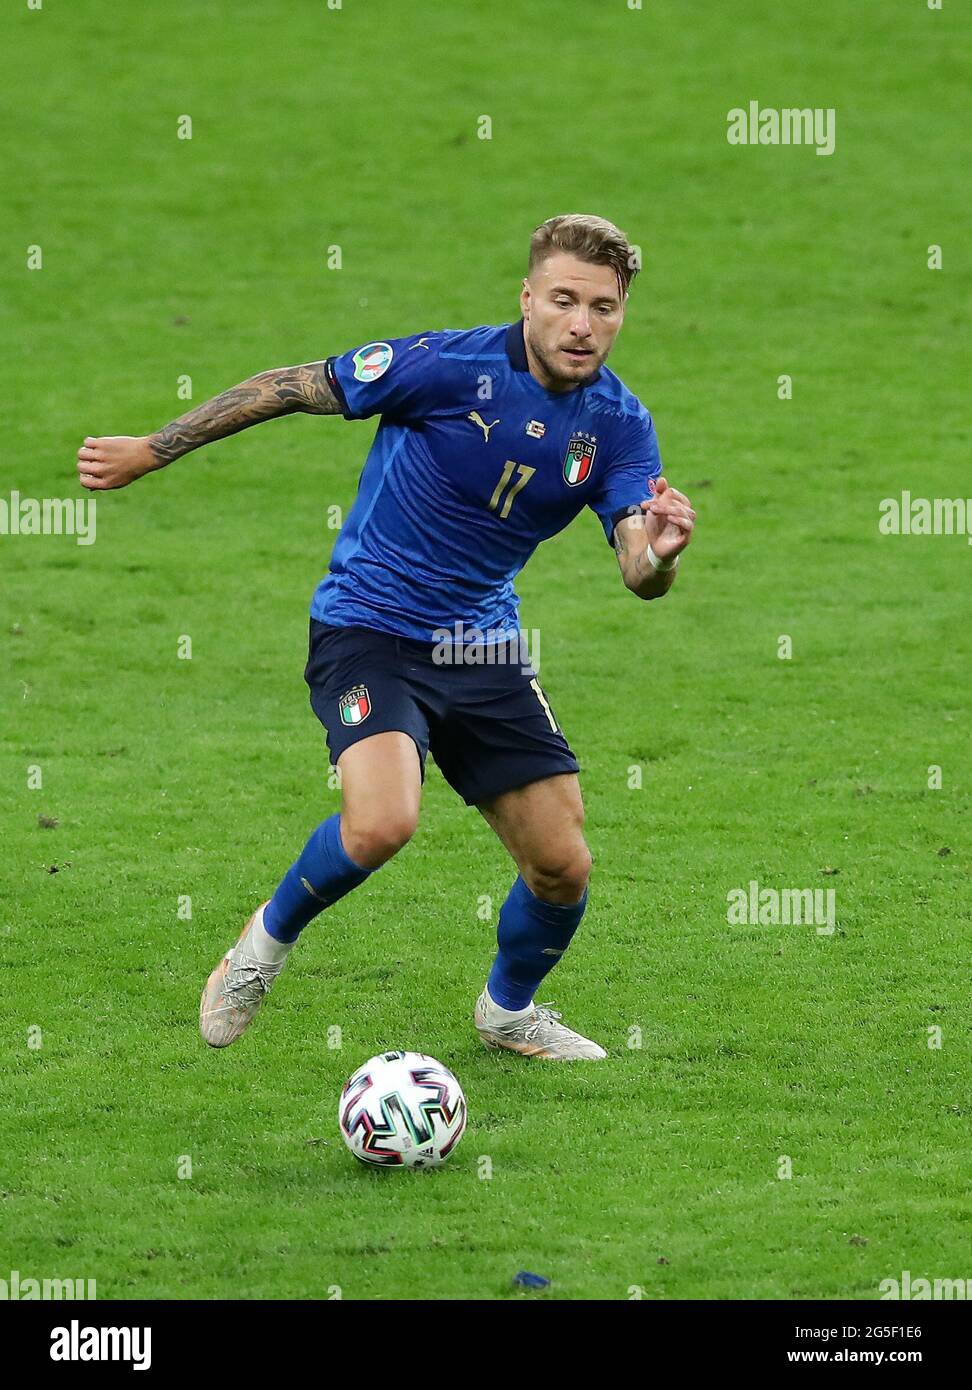 London, England, 26th June 2021. Ciro Immobile of Italy during the UEFA European Championships match at Wembley Stadium, London. Picture credit should read: David Klein / Sportimage Stock Photo